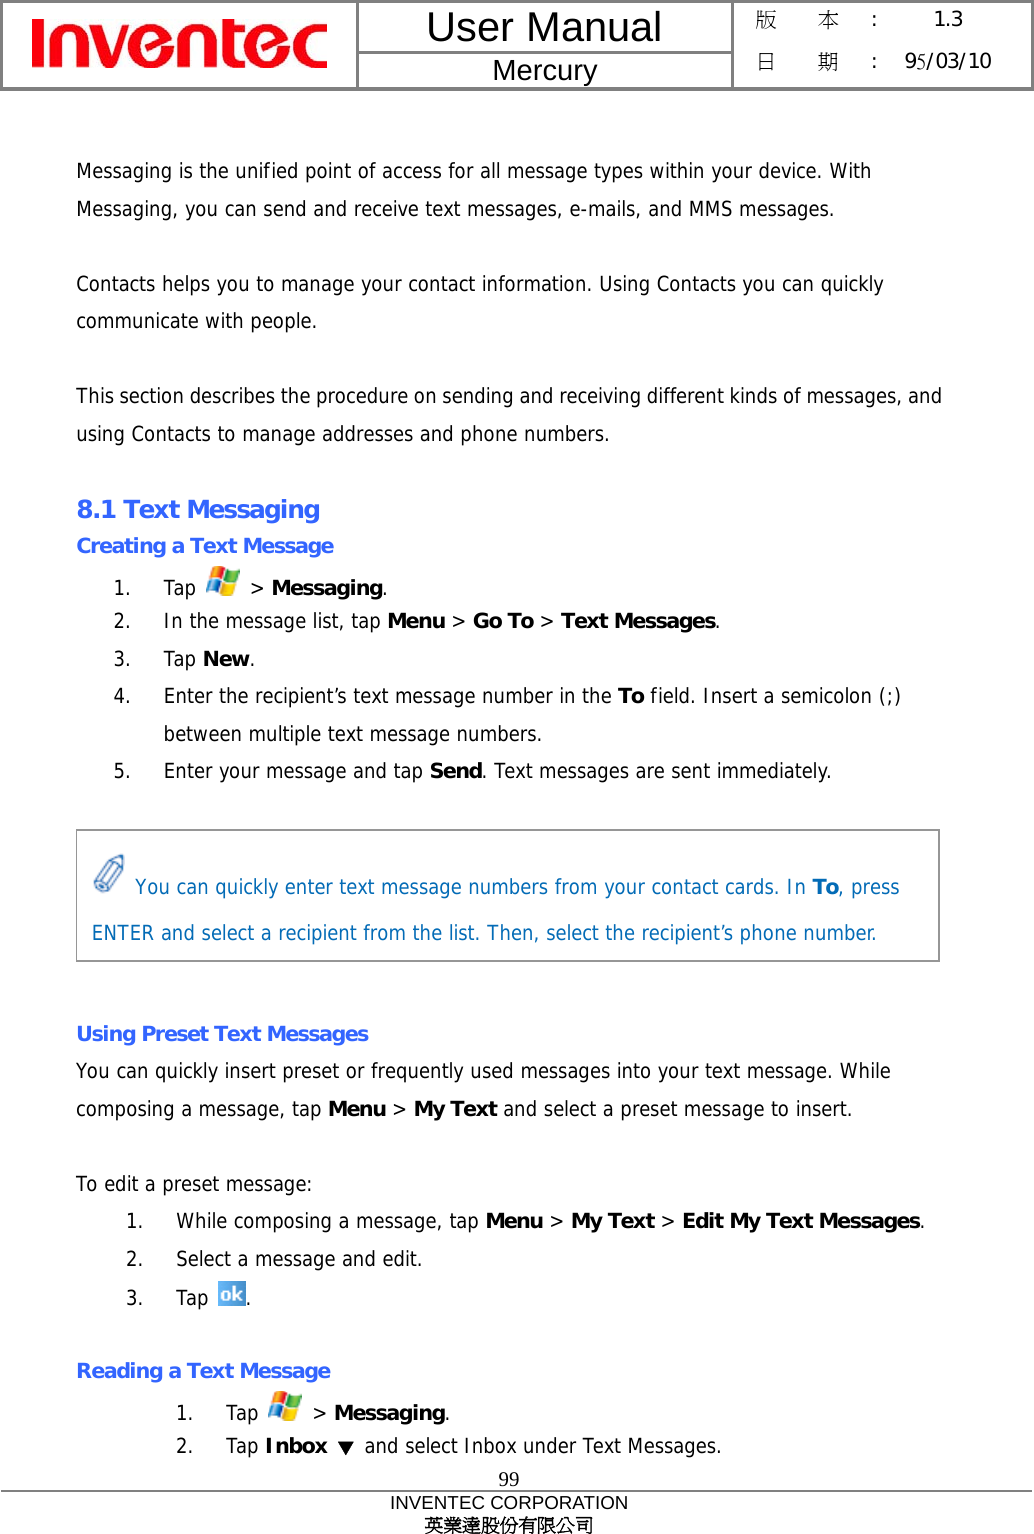 User Manual  Mercury 版    本 :  1.3 日    期 : 95/03/10  99 INVENTEC CORPORATION 英業達股份有限公司   Messaging is the unified point of access for all message types within your device. With Messaging, you can send and receive text messages, e-mails, and MMS messages.  Contacts helps you to manage your contact information. Using Contacts you can quickly communicate with people.  This section describes the procedure on sending and receiving different kinds of messages, and using Contacts to manage addresses and phone numbers.  8.1 Text Messaging Creating a Text Message 1. Tap   &gt; Messaging. 2.  In the message list, tap Menu &gt; Go To &gt; Text Messages. 3. Tap New. 4.  Enter the recipient’s text message number in the To field. Insert a semicolon (;) between multiple text message numbers. 5.  Enter your message and tap Send. Text messages are sent immediately.       Using Preset Text Messages You can quickly insert preset or frequently used messages into your text message. While composing a message, tap Menu &gt; My Text and select a preset message to insert.  To edit a preset message: 1.  While composing a message, tap Menu &gt; My Text &gt; Edit My Text Messages. 2.  Select a message and edit. 3. Tap  .  Reading a Text Message 1. Tap   &gt; Messaging. 2. Tap Inbox ▼ and select Inbox under Text Messages.  You can quickly enter text message numbers from your contact cards. In To, press ENTER and select a recipient from the list. Then, select the recipient’s phone number. 